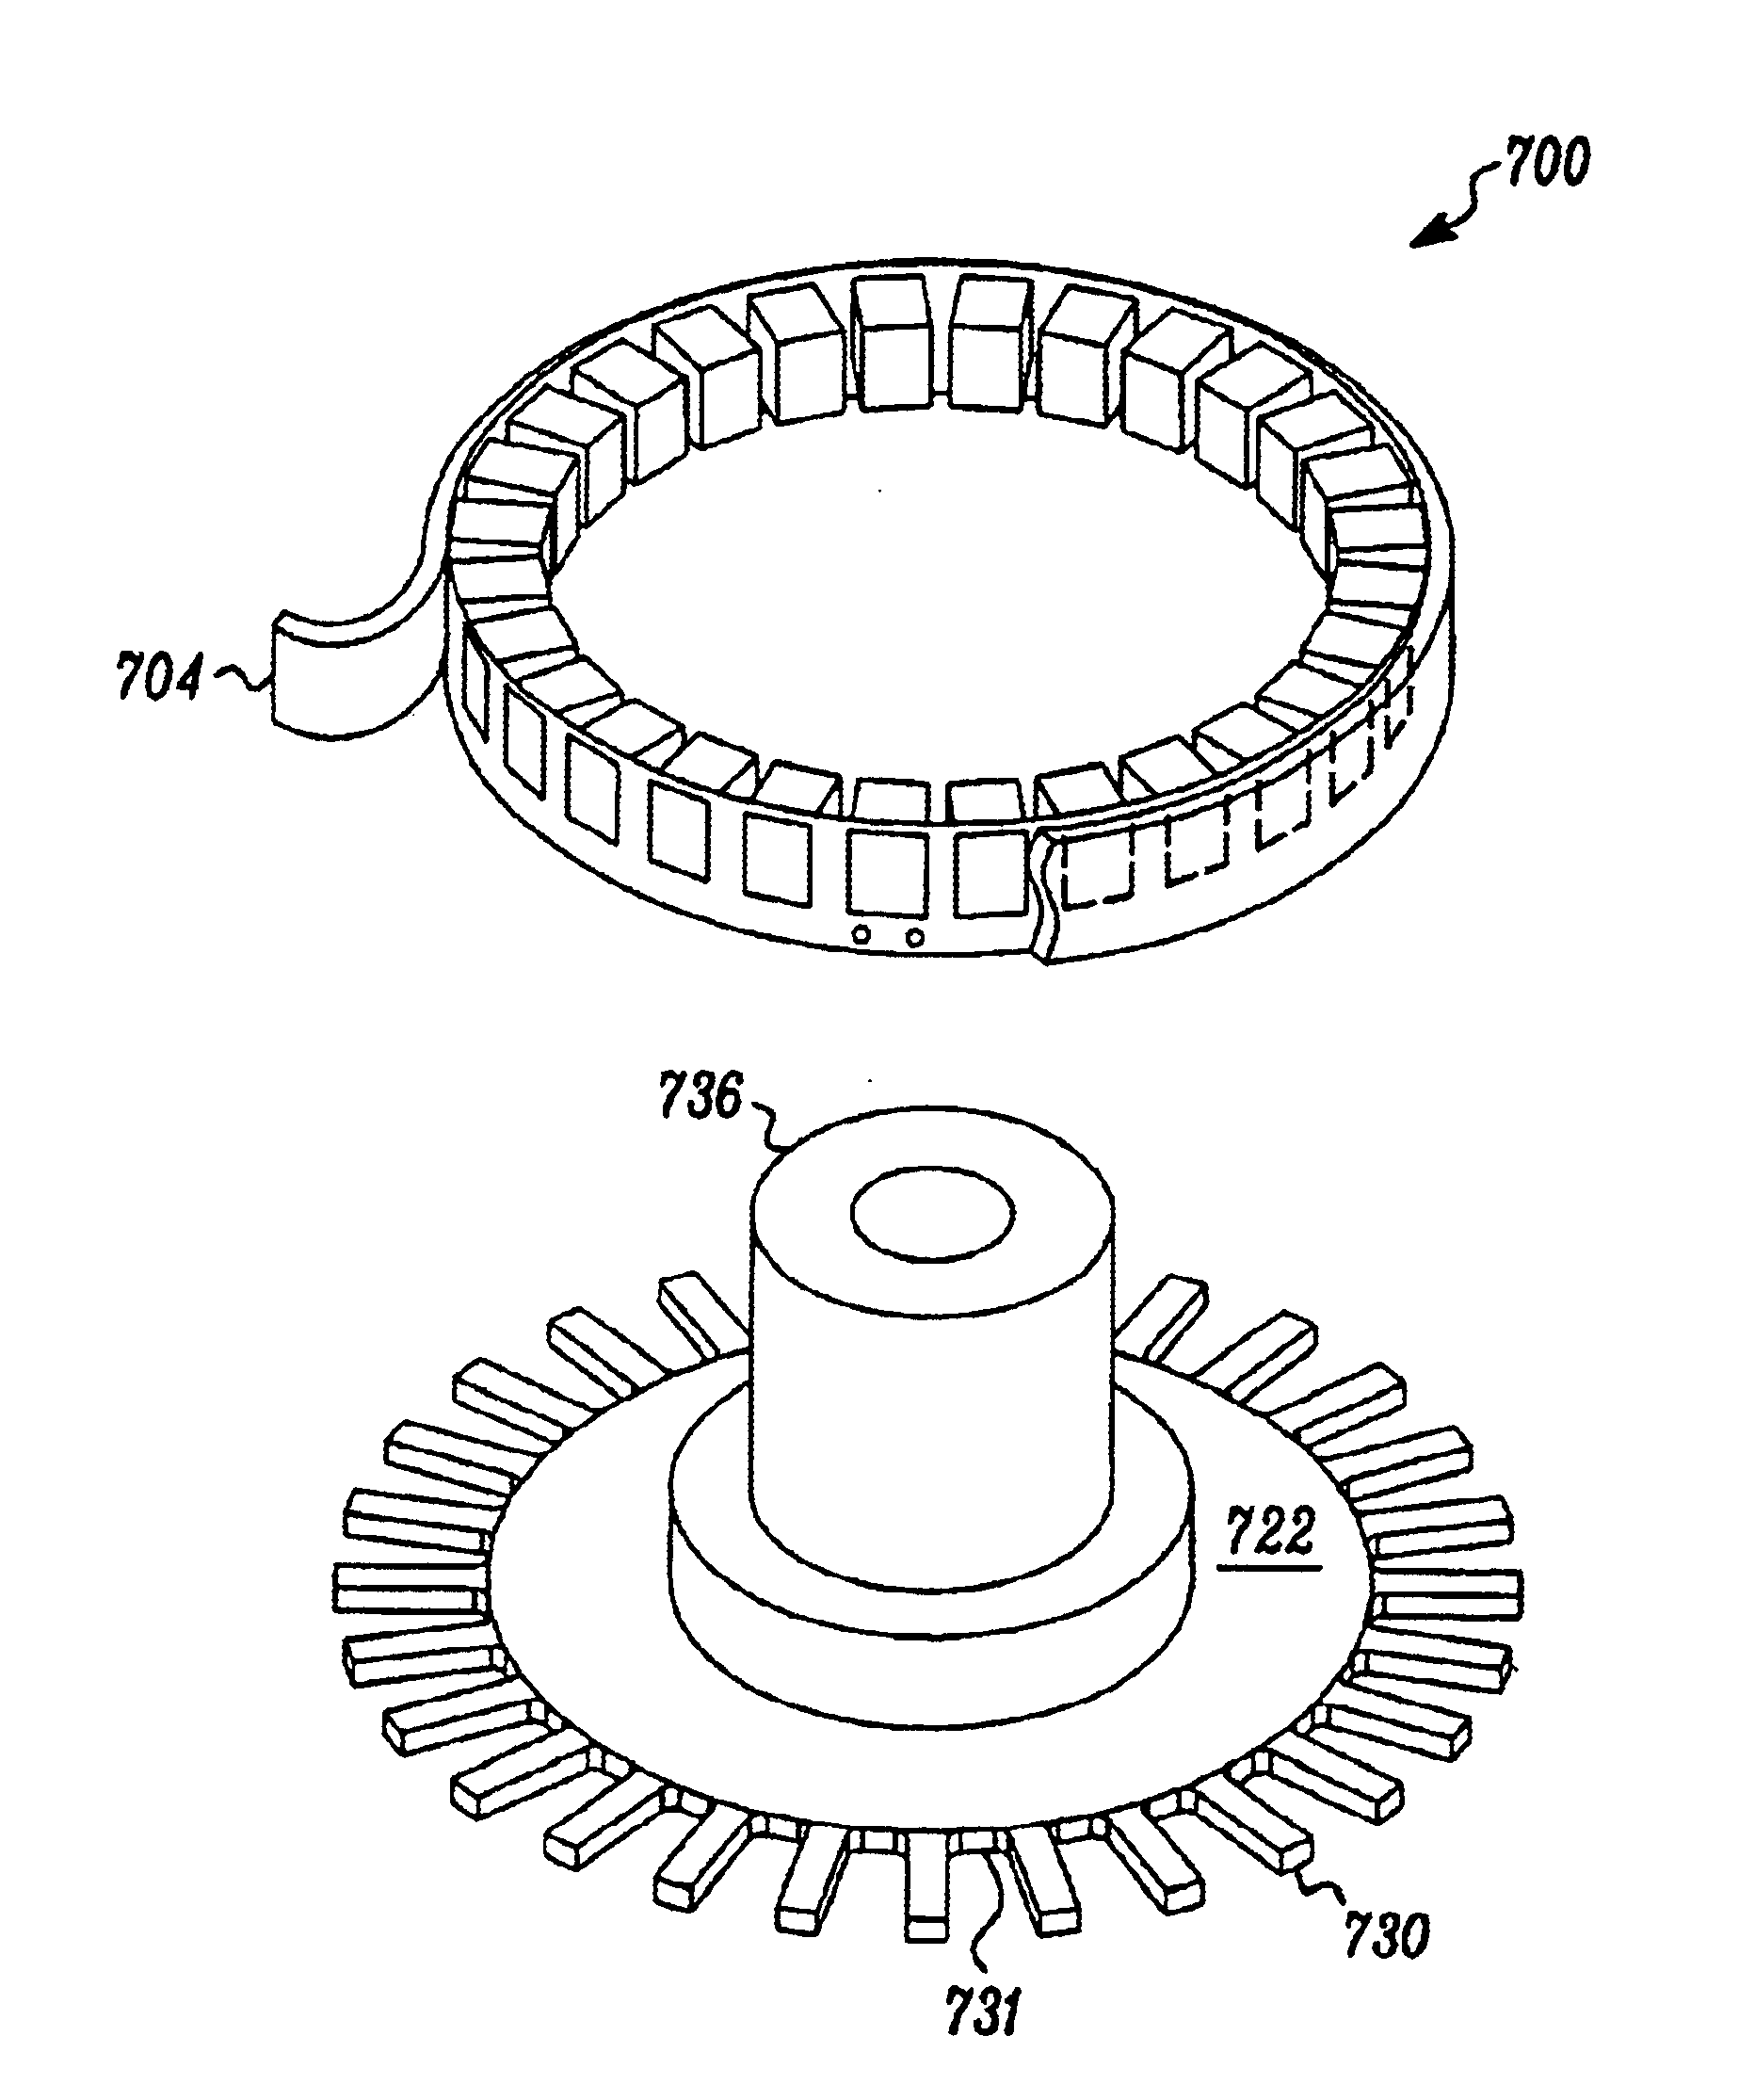 Automated portable medication radial dispensing apparatus and method using a carrier tape